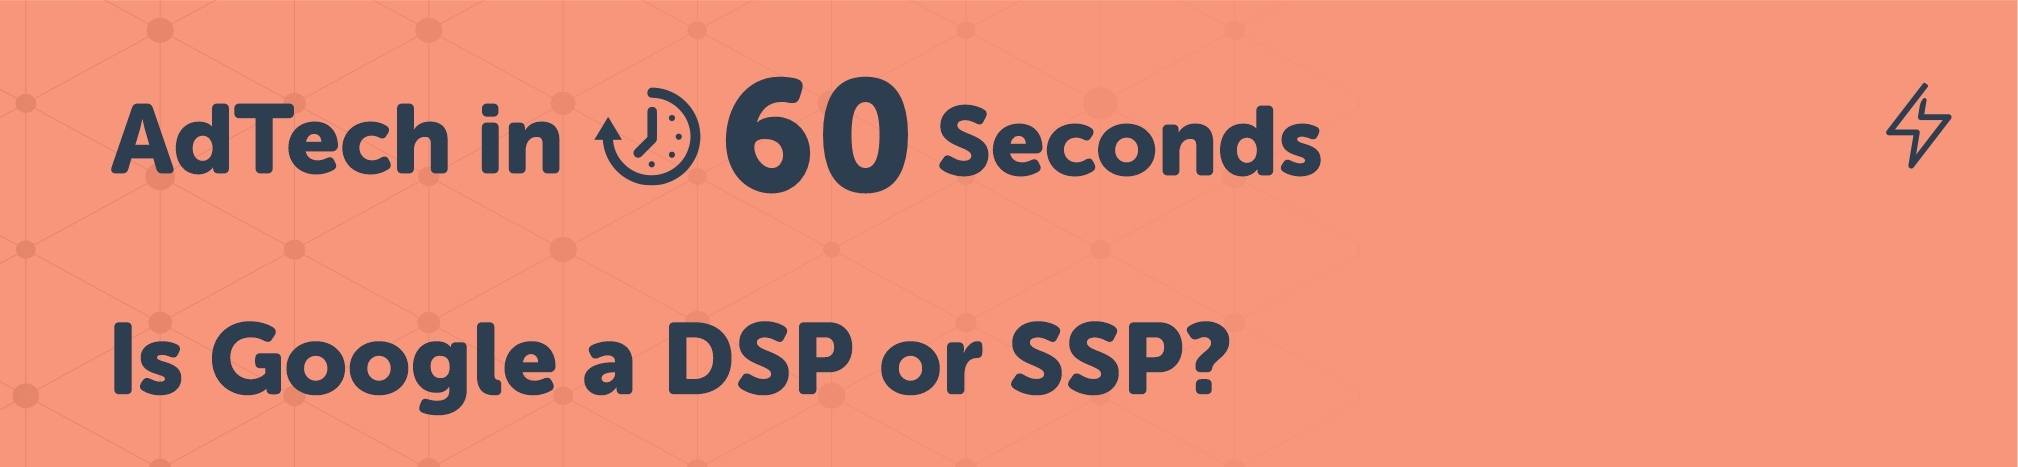 Is Google a DSP or SSP?